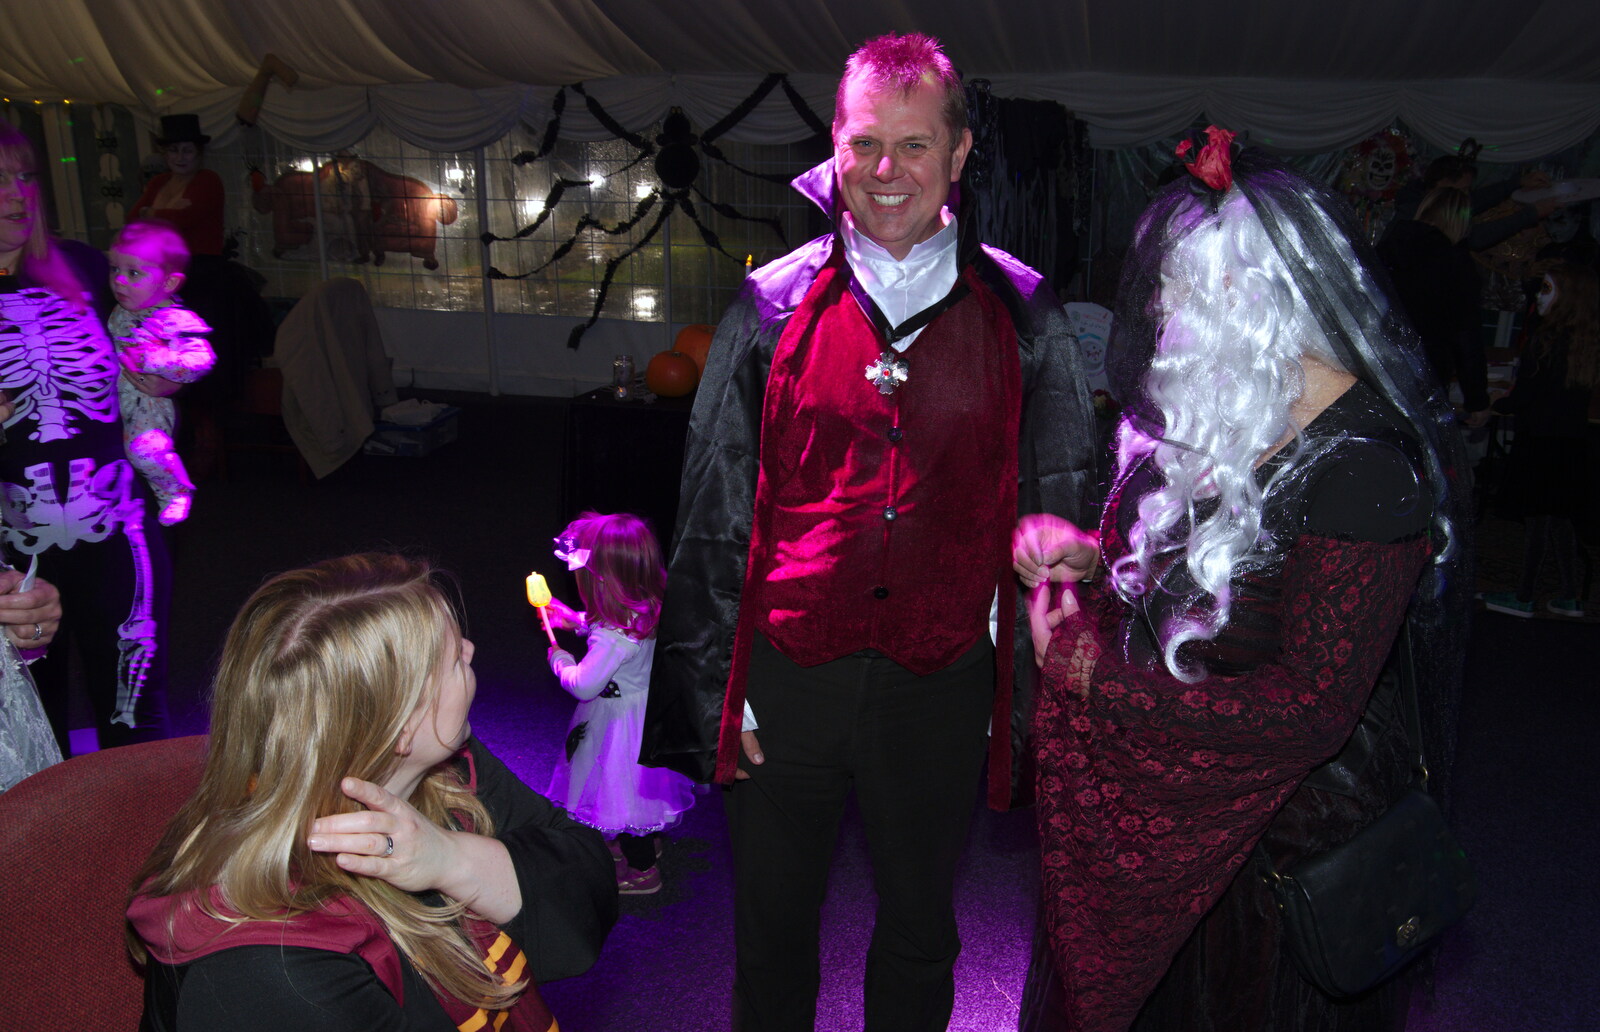 Andrew appears as Dracula from Day of the Dead Party at the Oaksmere, Brome, Suffolk - 2nd November 2019